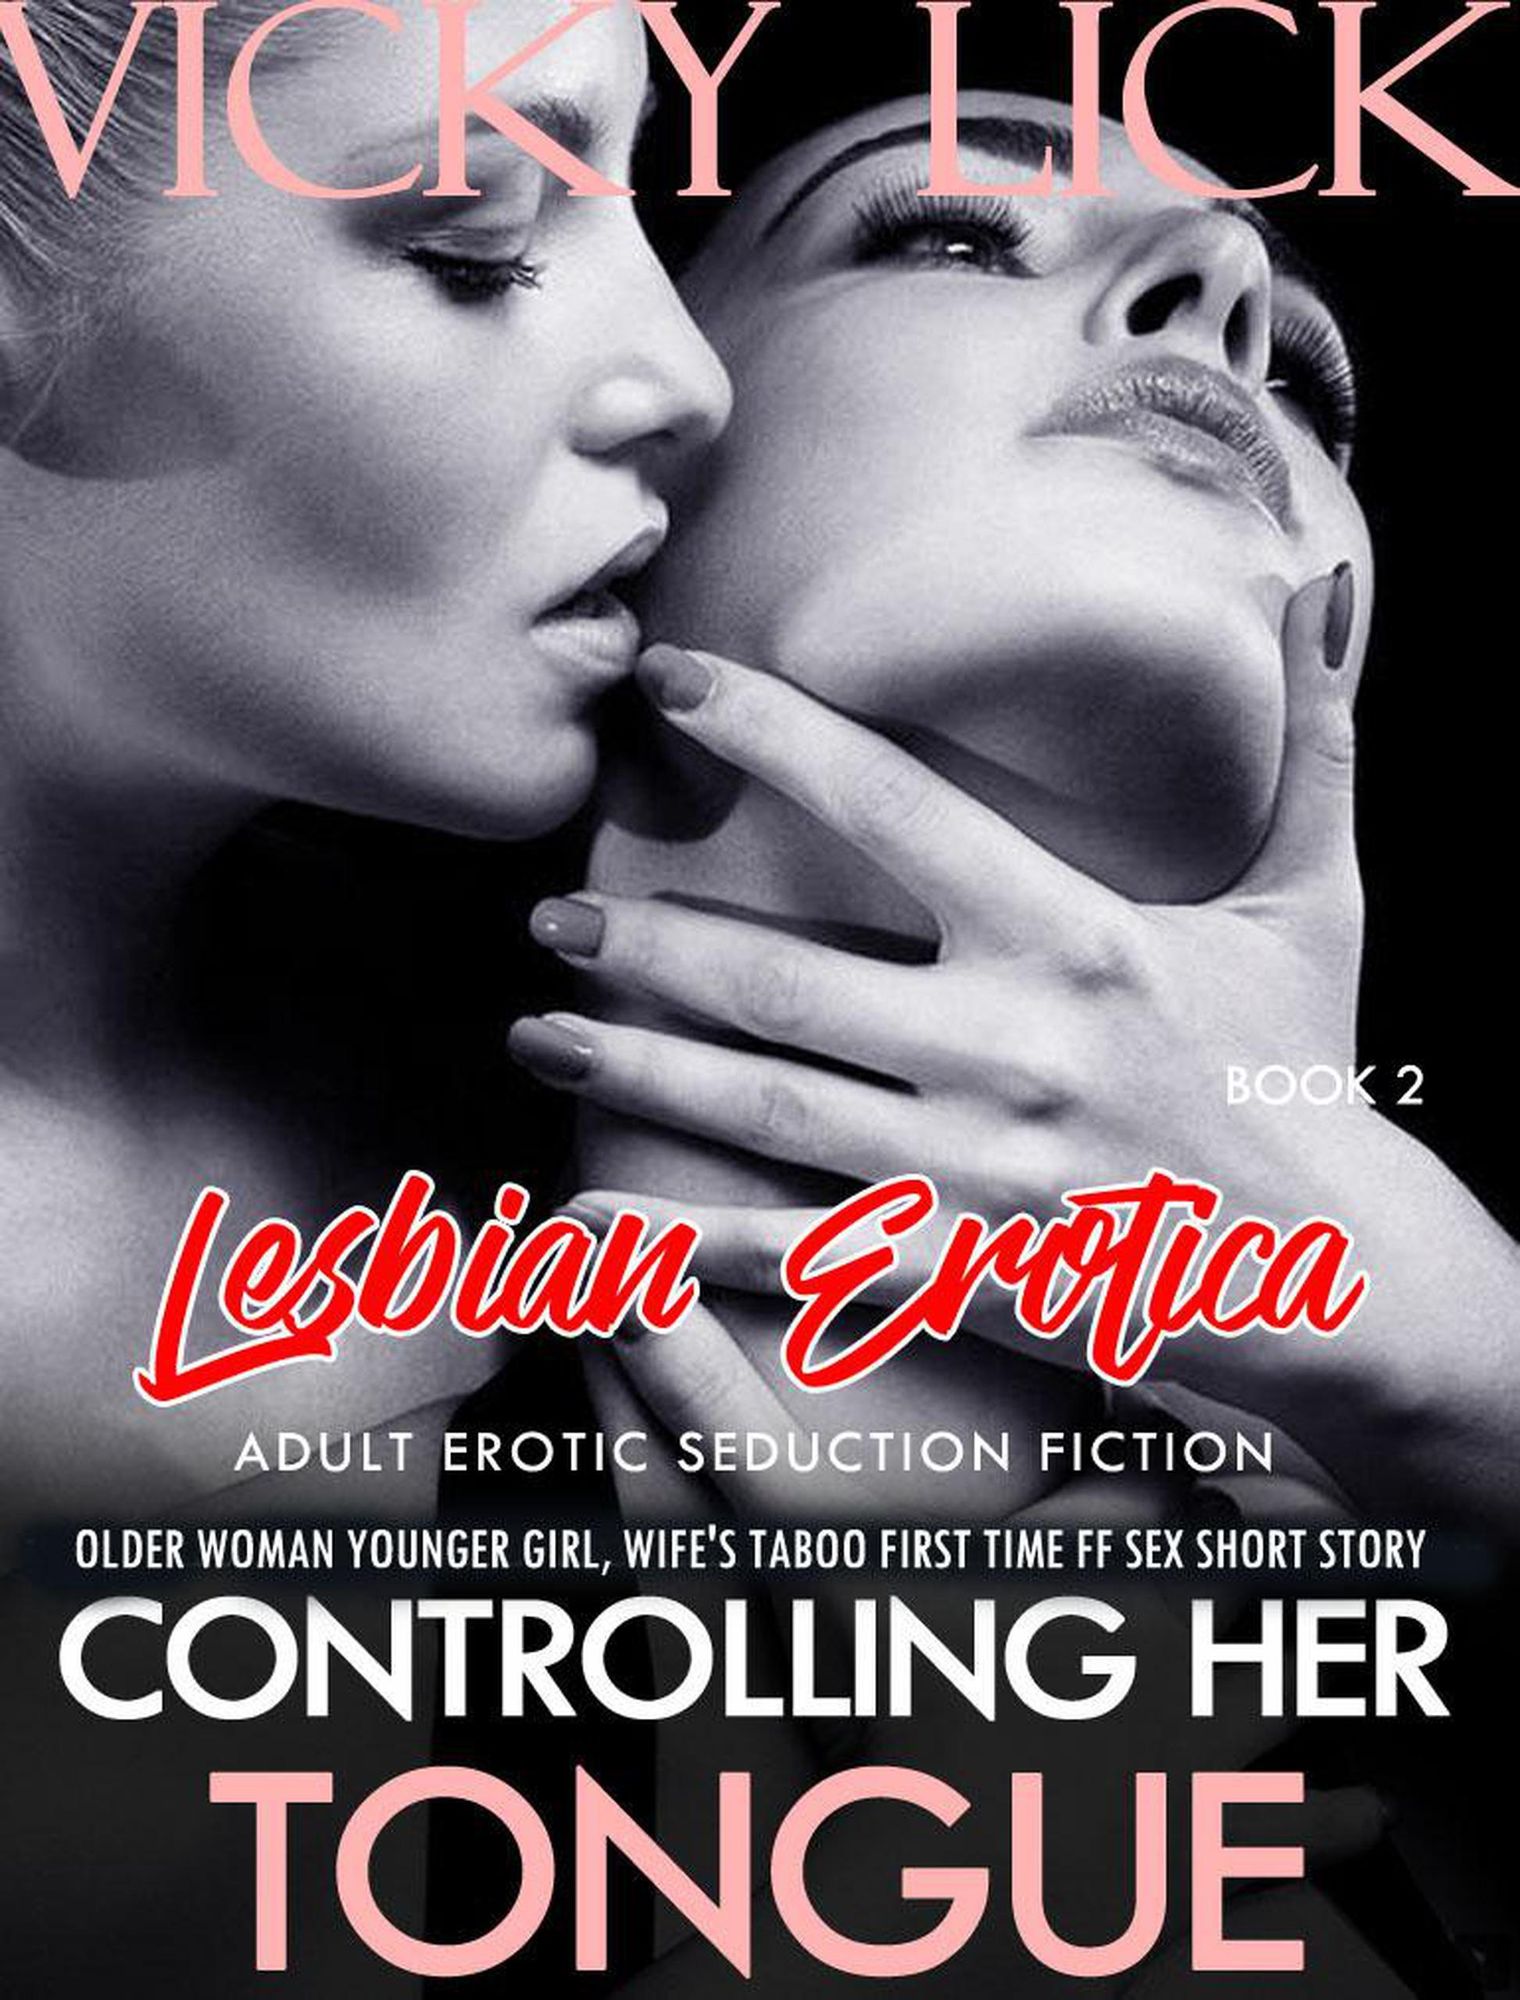 Lesbian Erotica Controlling Her Tongue - Older Woman Younger Girl, Wifes Taboo First Time FF Sex Short Story (Adult Erotic Seduction Fiction, #2) von Vicky Lick image photo